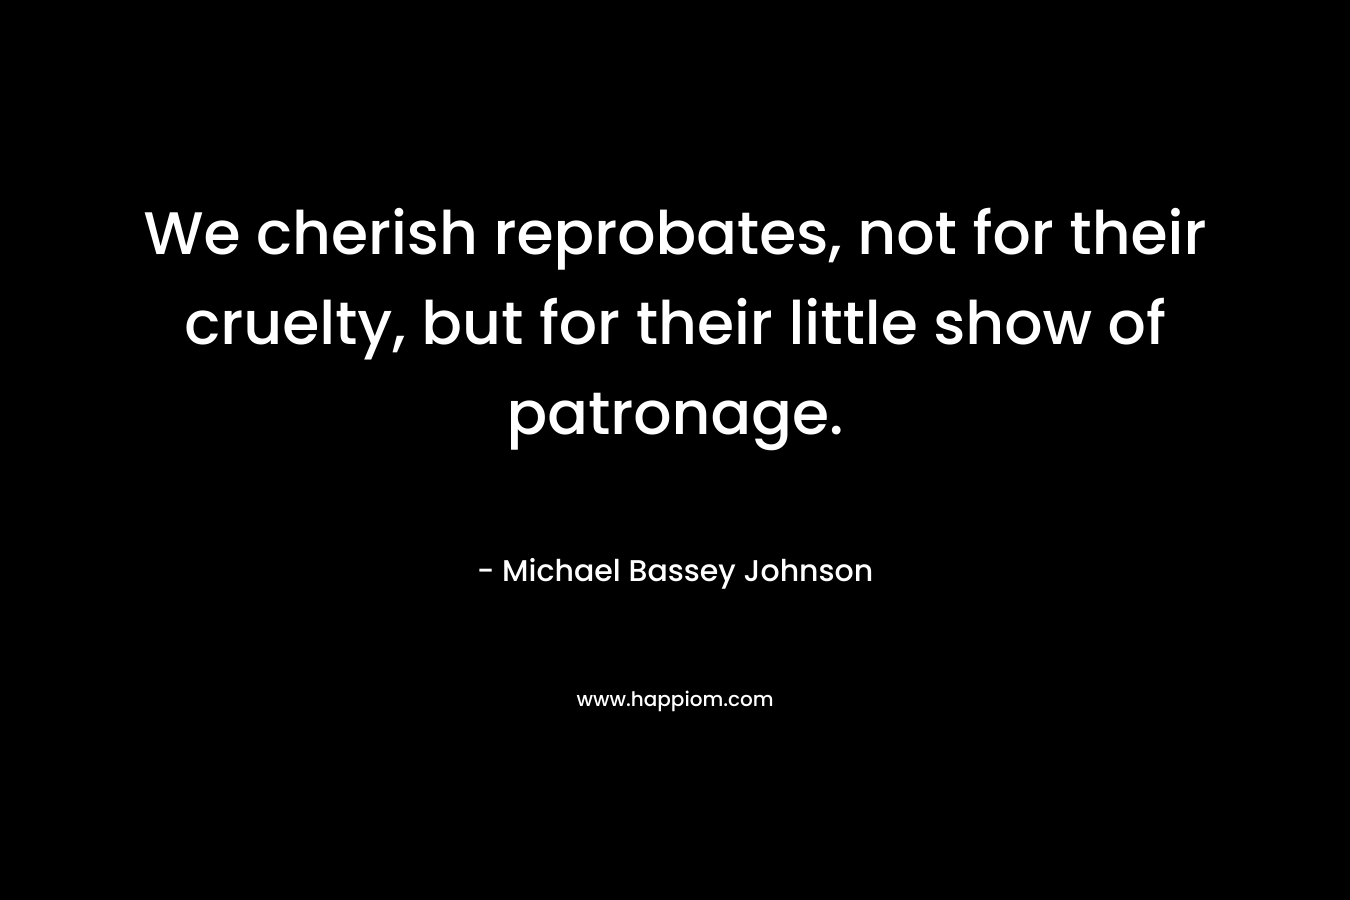 We cherish reprobates, not for their cruelty, but for their little show of patronage.